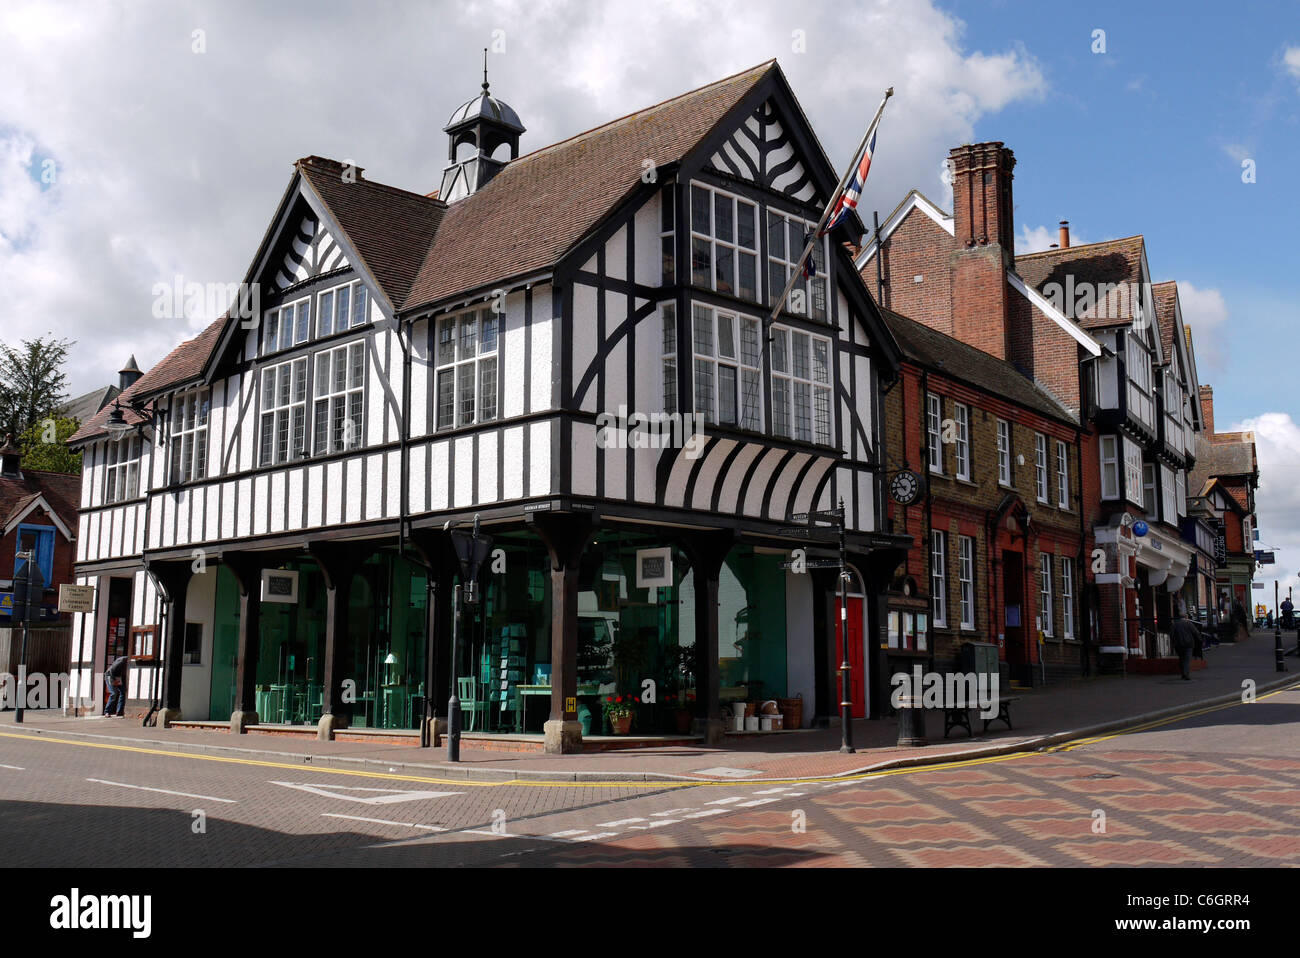 Tudor style building on the corner of Akeman Street and High Street, in the market town of Tring, Hertfordshire, England Stock Photo